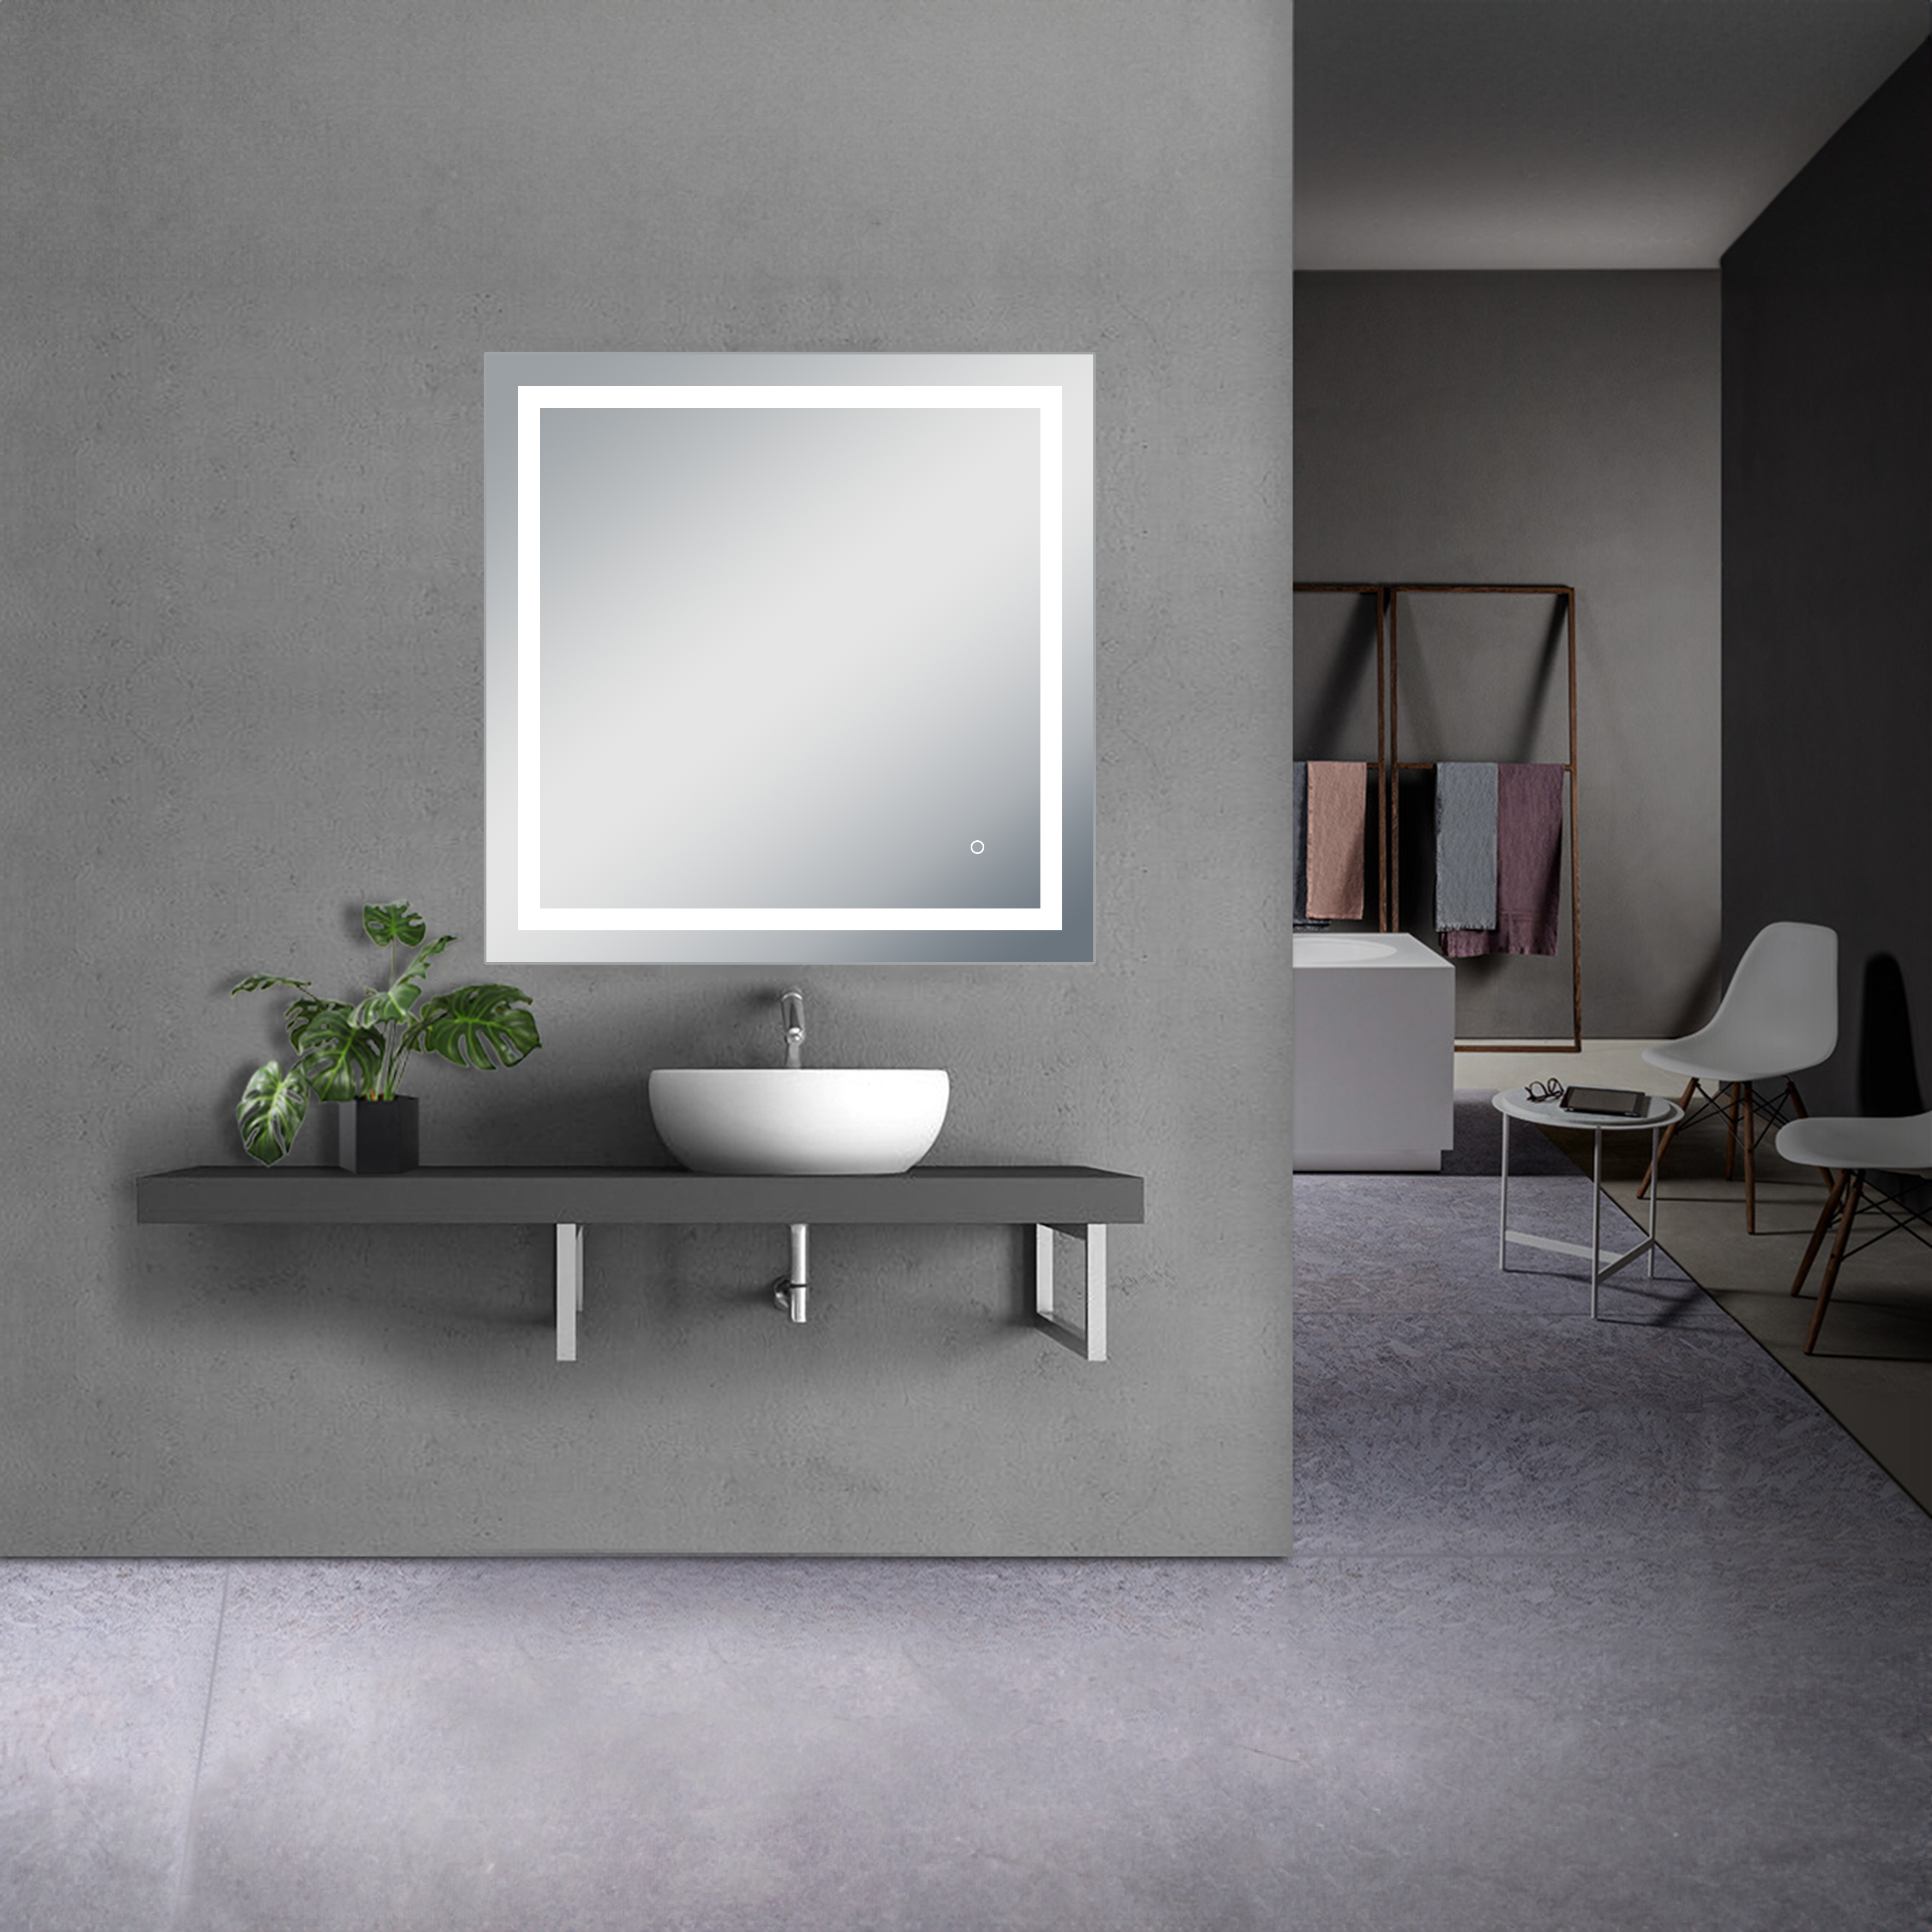 Riga LED Mirror with Dimmer and Defogger - Available in 4 Sizes